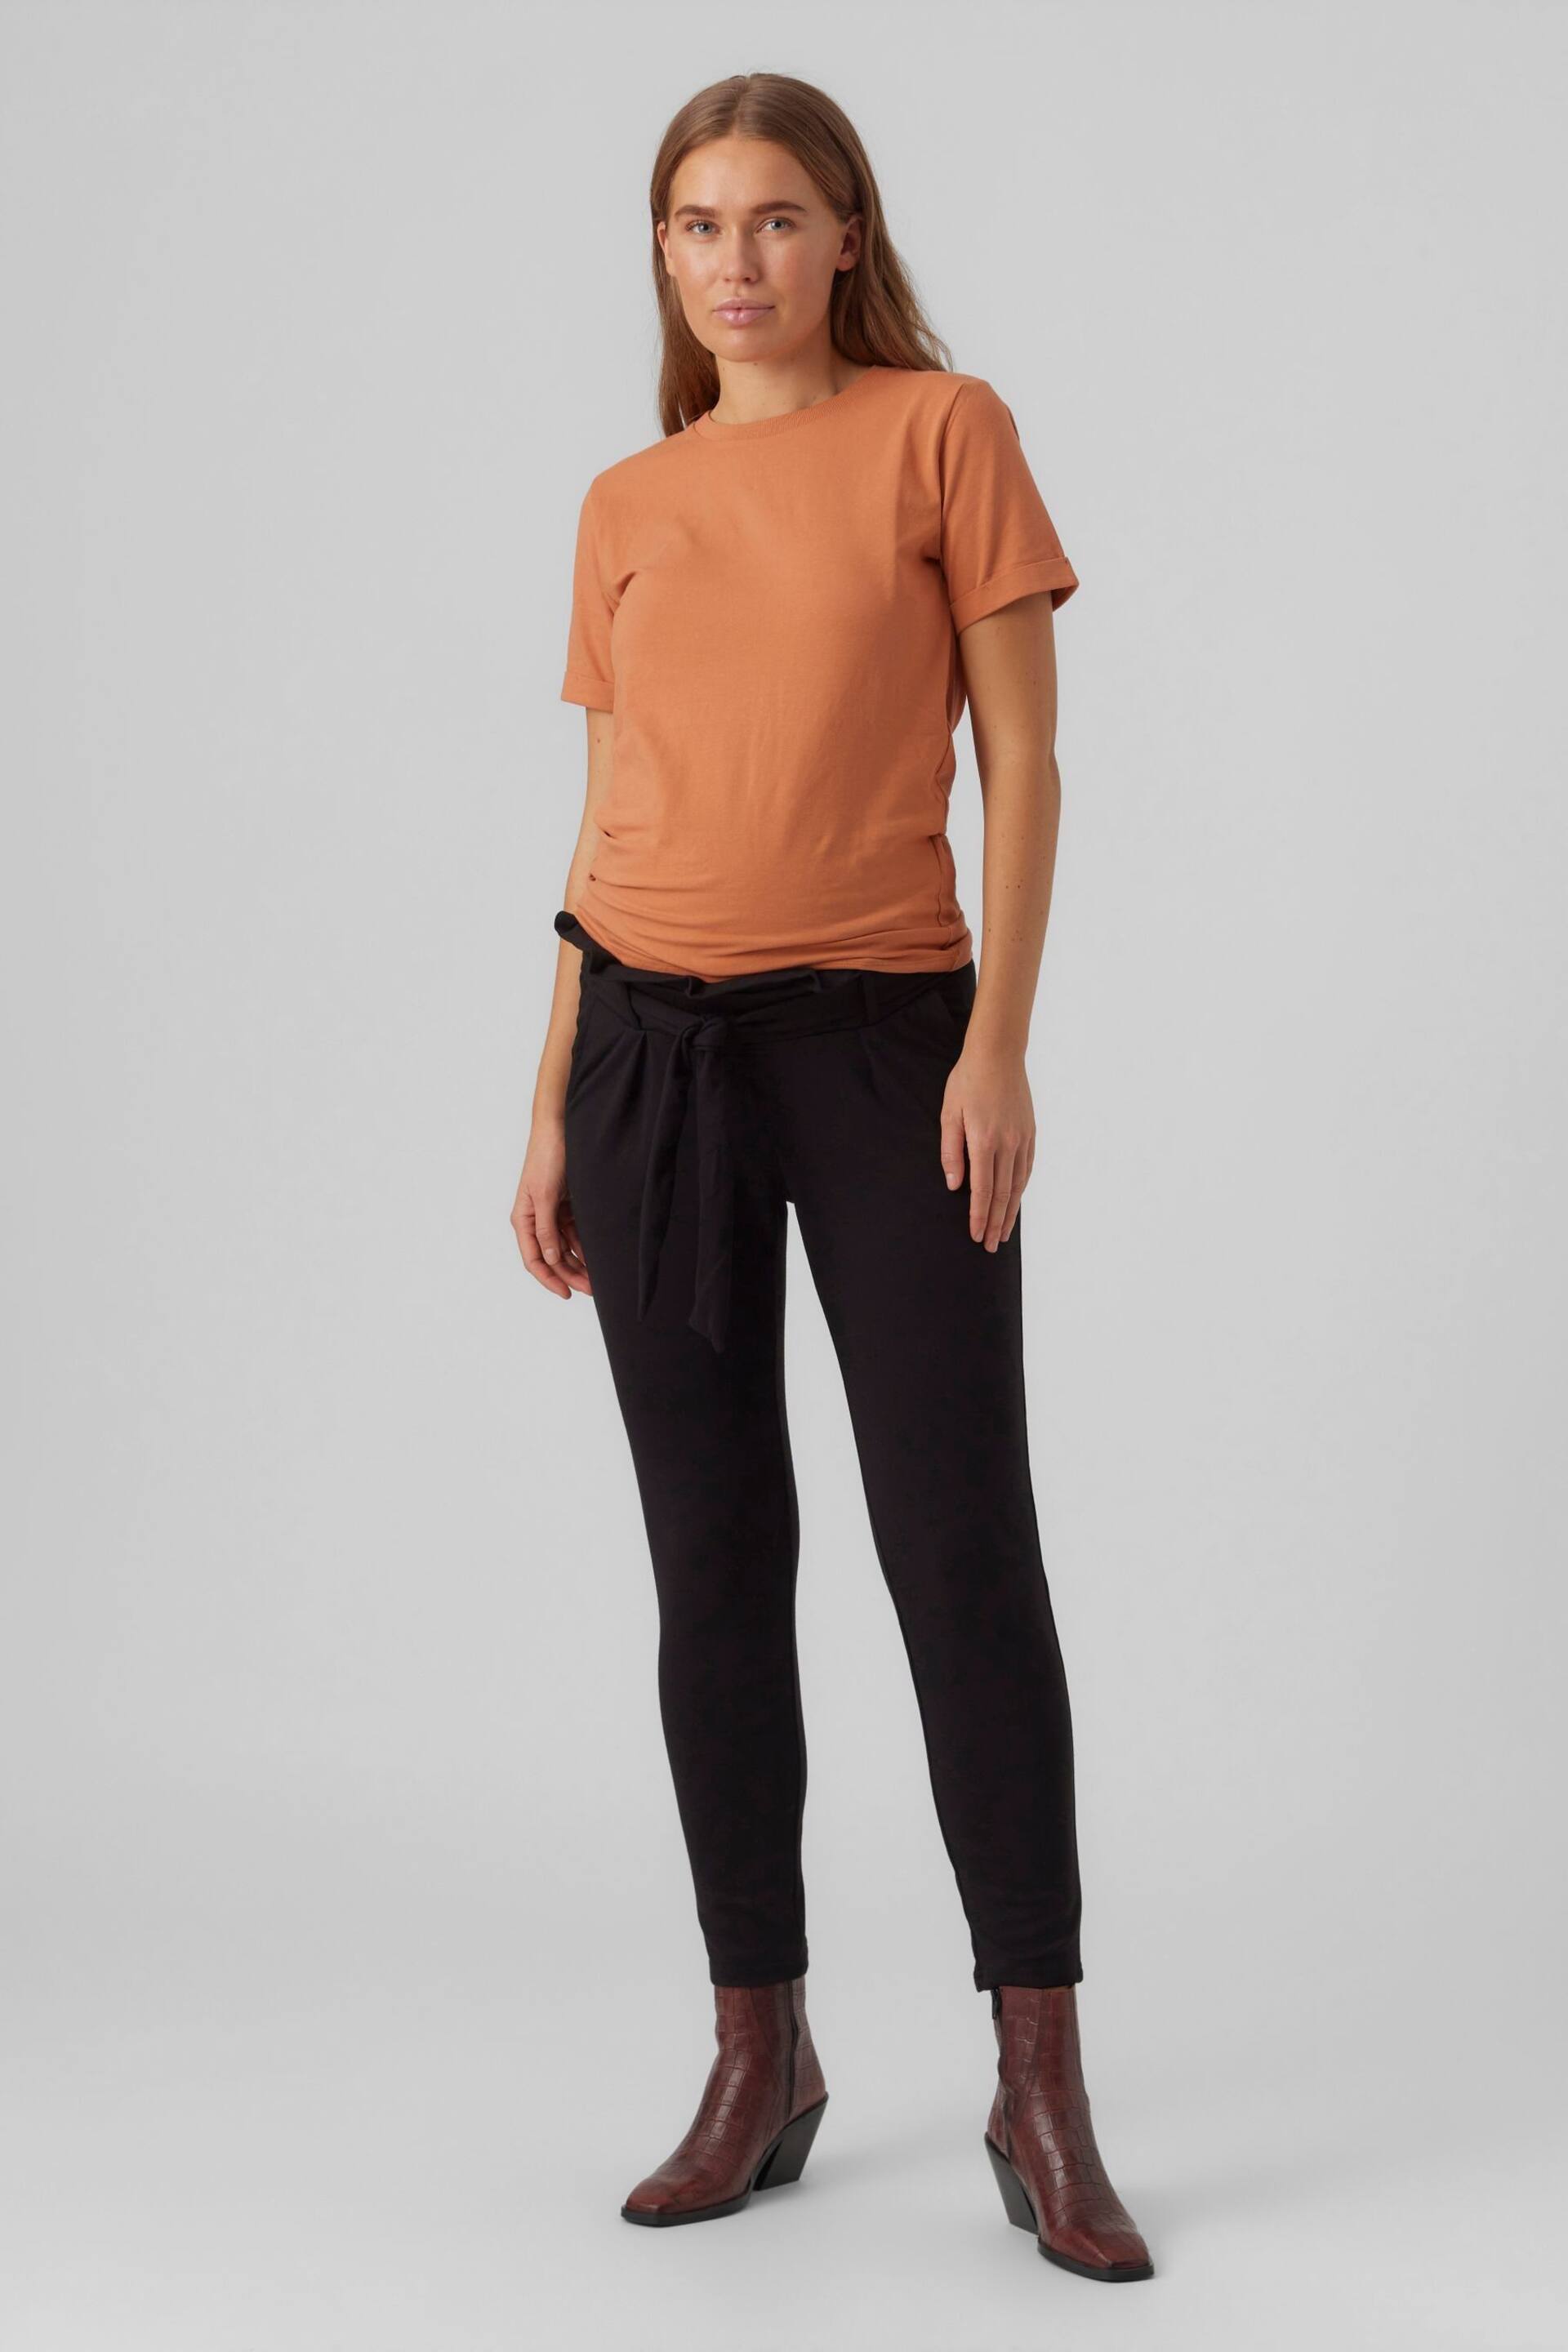 VERO MODA Black Maternity Over The Bump Paperbag Waist Stretch Trousers - Image 1 of 5